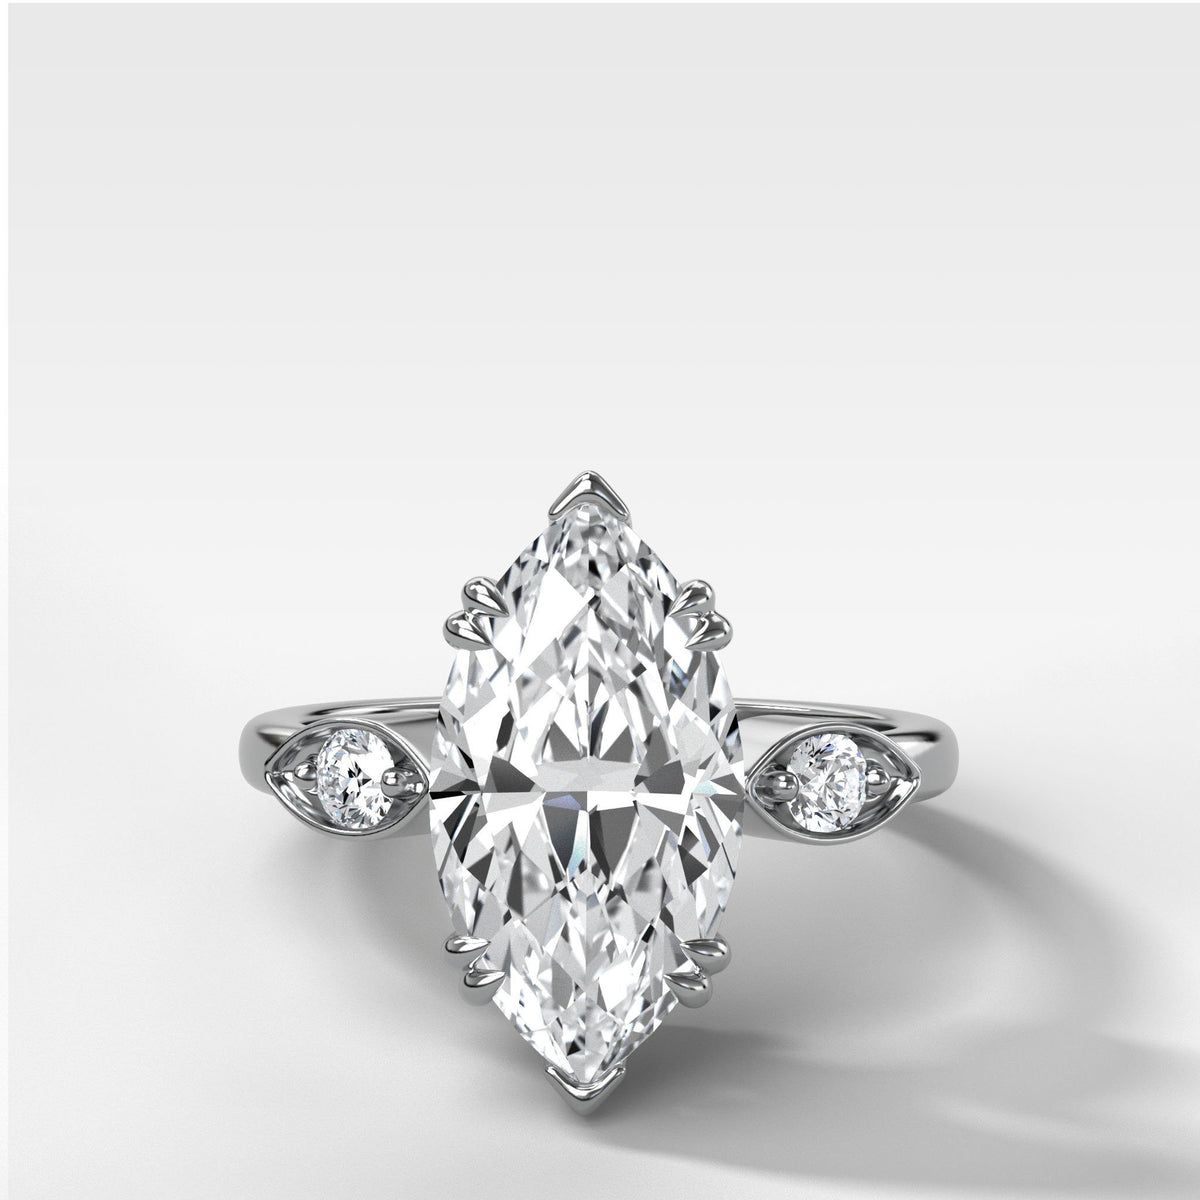 Vintage Ridge Shank Diamond Engagement Ring With Marquise Cut by Good Stone in White Gold